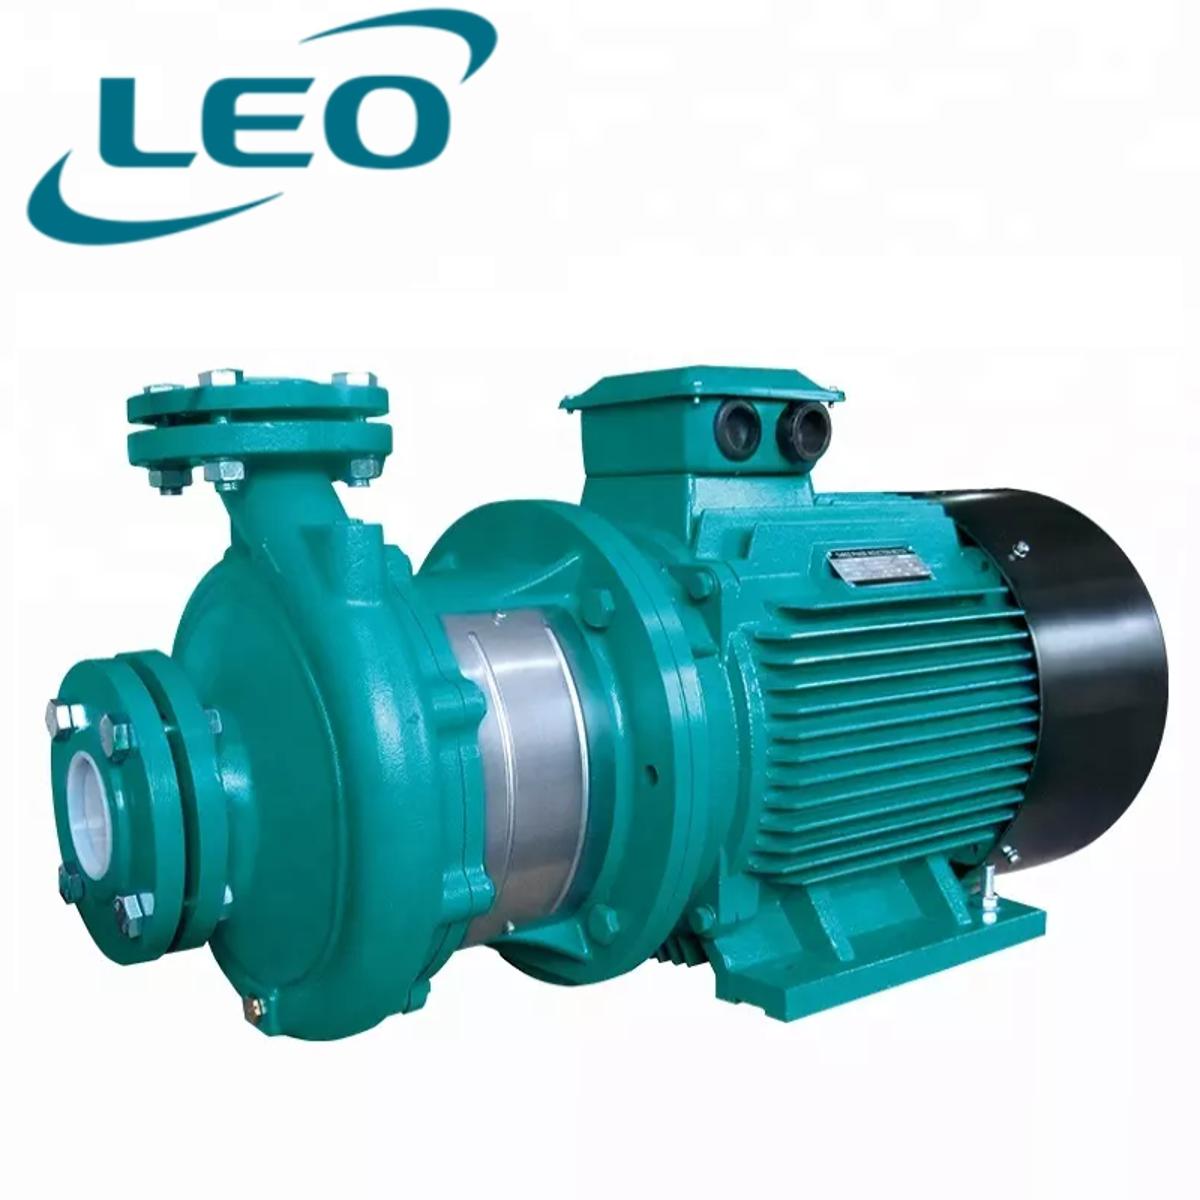 LEO - XST-50-200-110 - 11000 W - 15 HP - Clean Water HEAVY DUTY Centrifugal Pump With FLANGES  - 380V~400V THREE PHASE - SIZE :- 2 1-2" x 2 " - European STANDARD